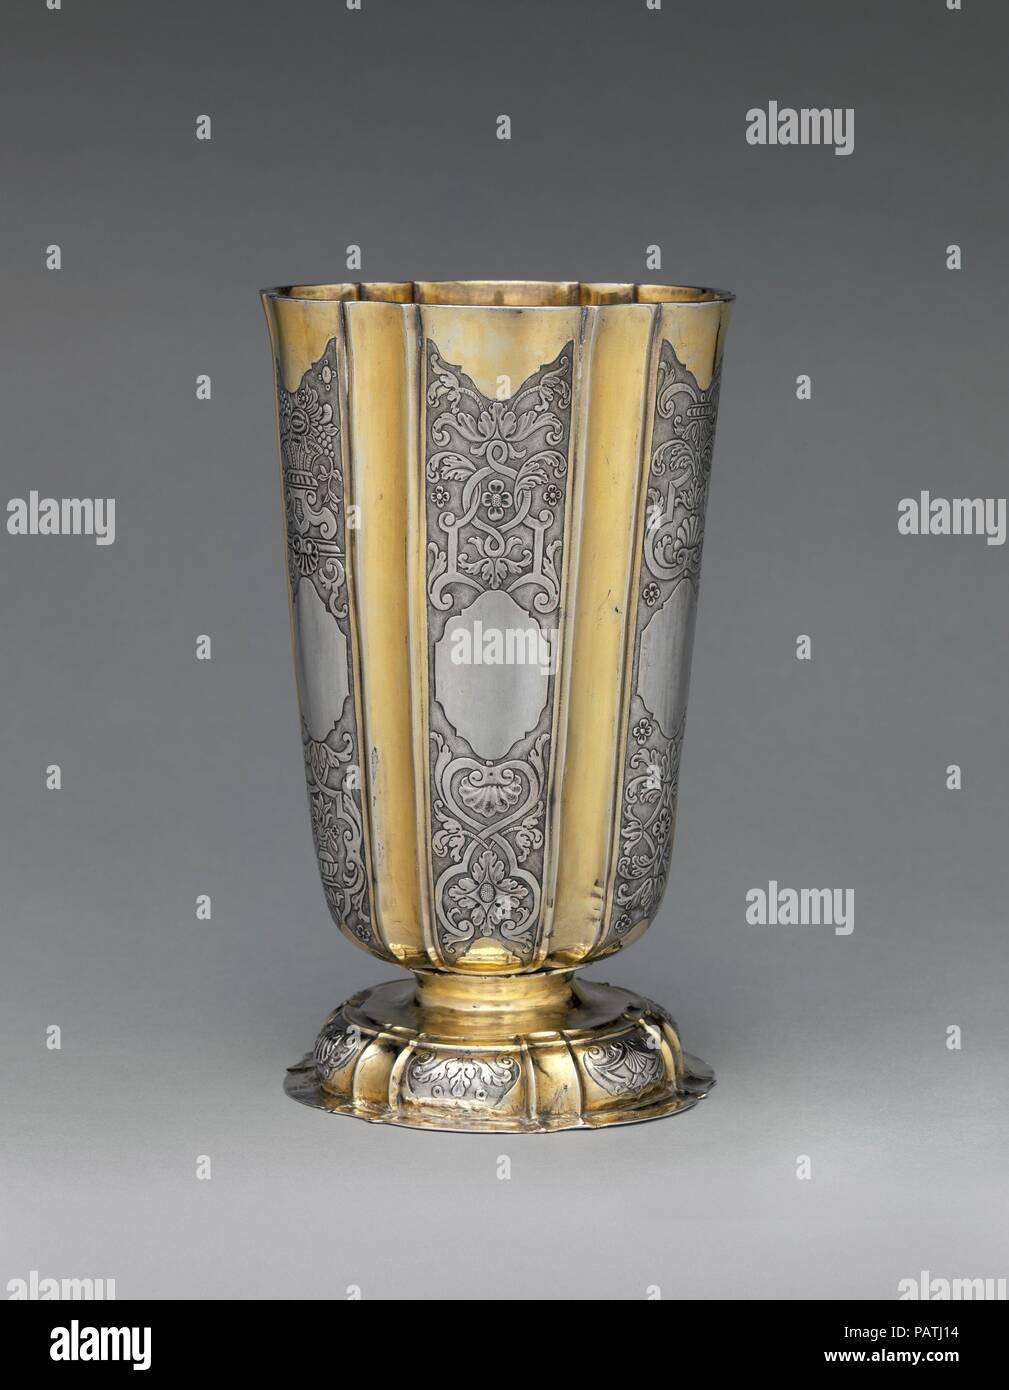 Beaker. Culture: Hungarian. Dimensions: Overall: 7 7/8 x 4 13/16 in. (20 x 12.2 cm). Maker: Georgius Olescher Jr. (master in 1721, died 1761). Date: ca. 1730-50.  An elegant rhythm is created in this beaker by alternating gilded vertical concave flutes with silver panels containing finely embossed and chased ornament on a matte ground. Georgius Olescher Jr., the maker here, was probably inspired by the work of Michael II May, who spent several years in France becoming familiar with Regence ornaments, returning to Brassó by December 1731. Other Transylvanian beakers are similarly decorated, inc Stock Photo